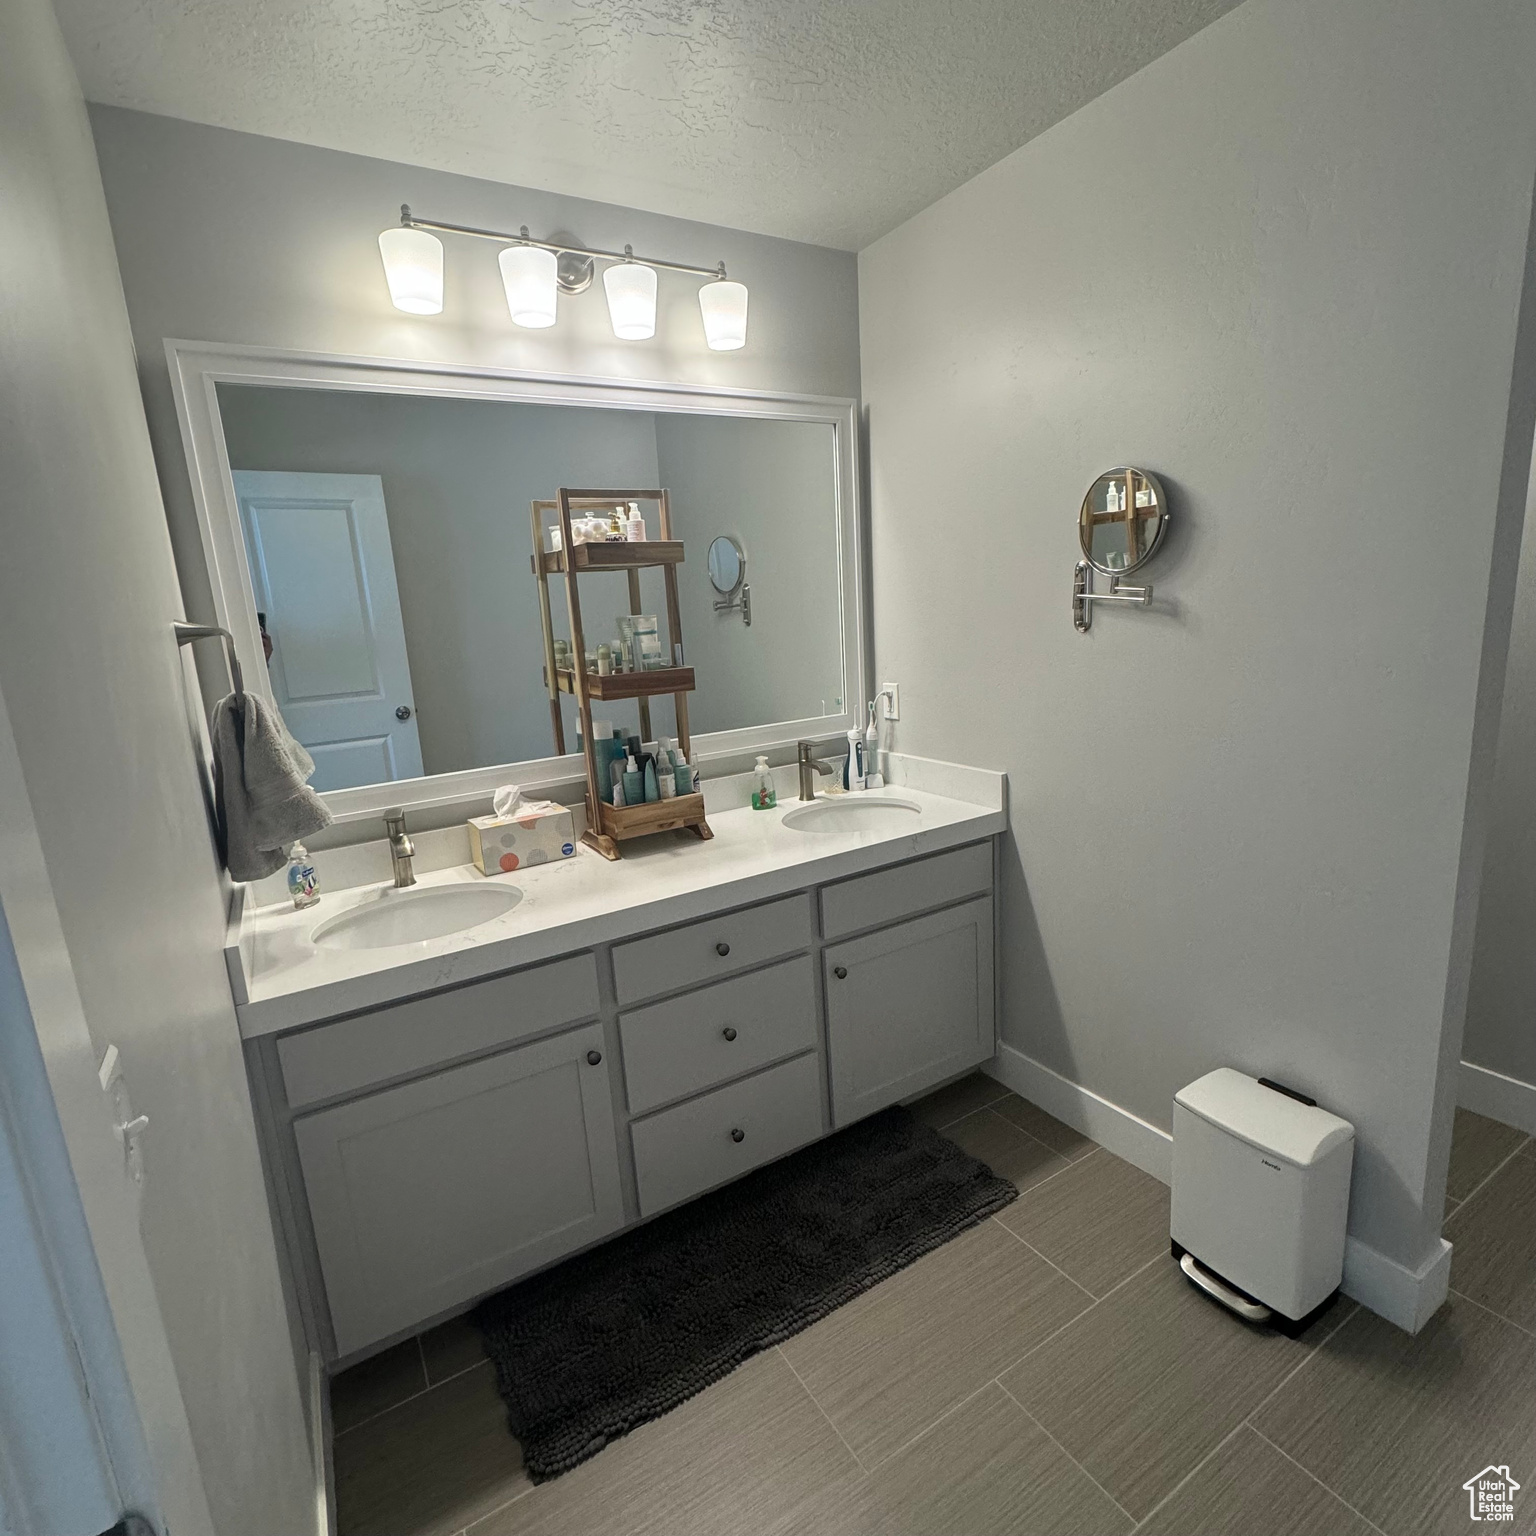 Bathroom featuring a textured ceiling, dual vanity, and tile flooring